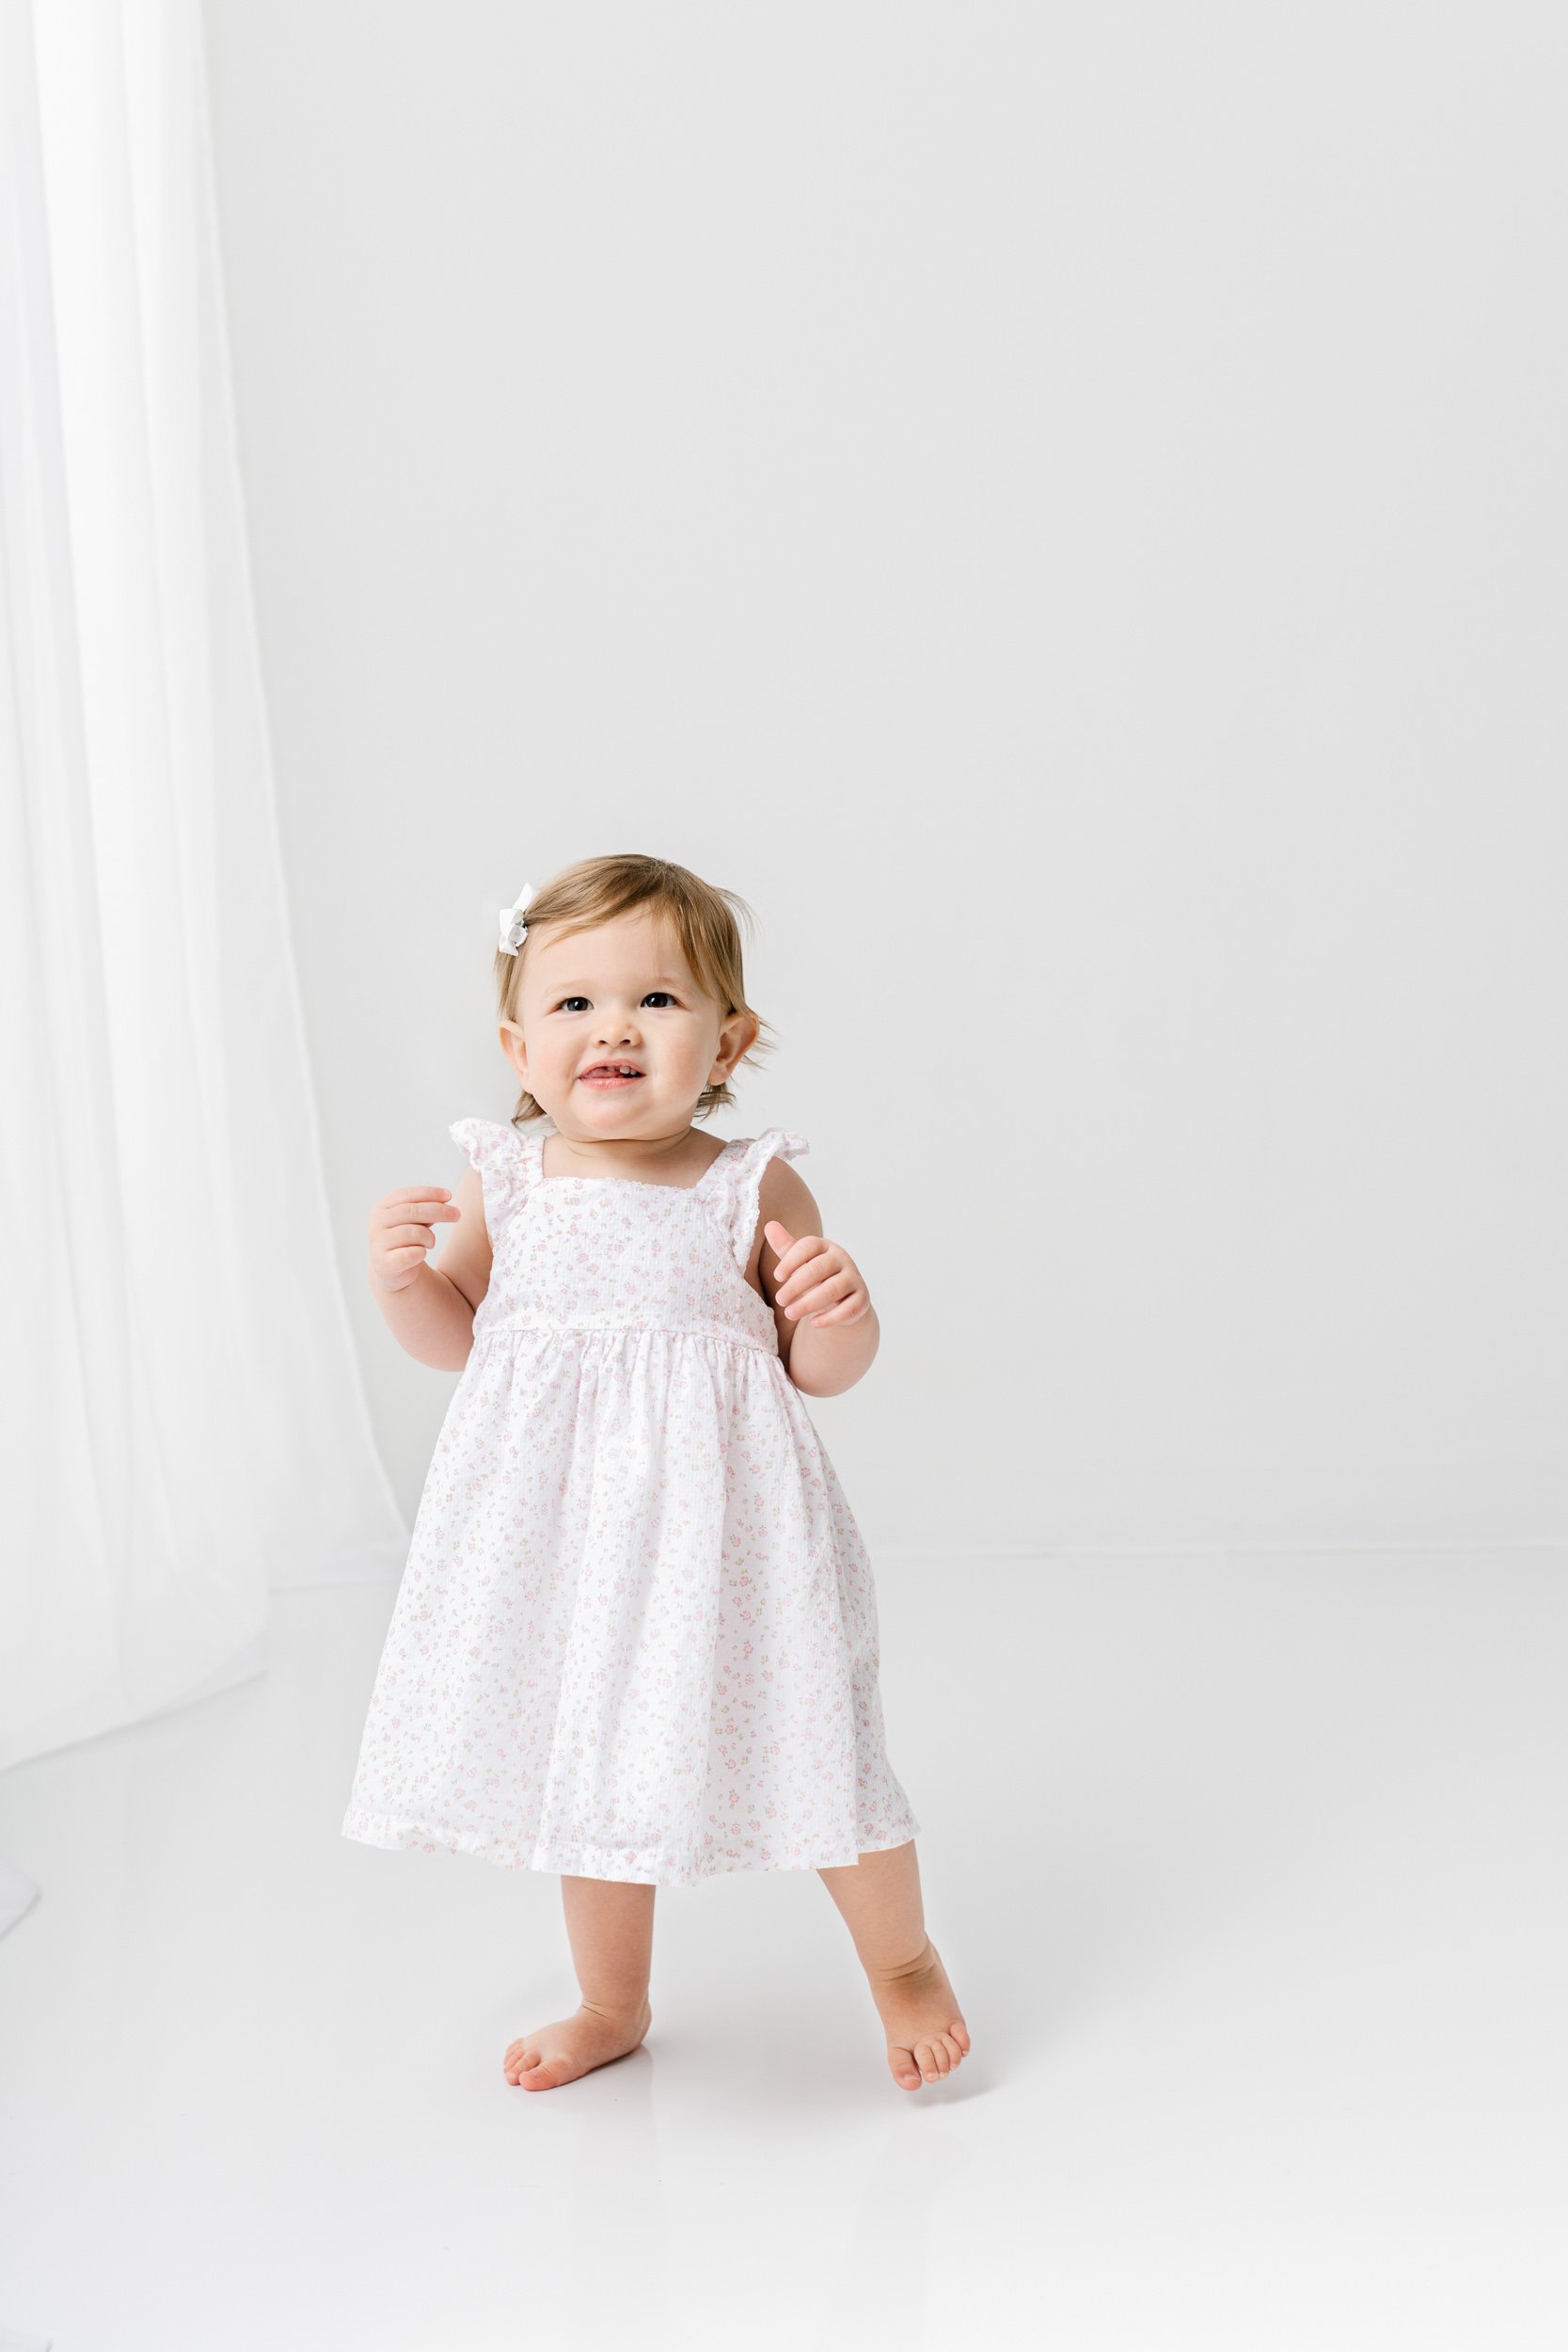  A studio portrait of a baby girl in a white floral dress on her first birthday by Nicole Hawkins Photography. baby girl #NicoleHawkinsPhotography #NicoleHawkinsBabies #studiochildren #firstbirthday #studiophotography #girlsbirthdayportraits 